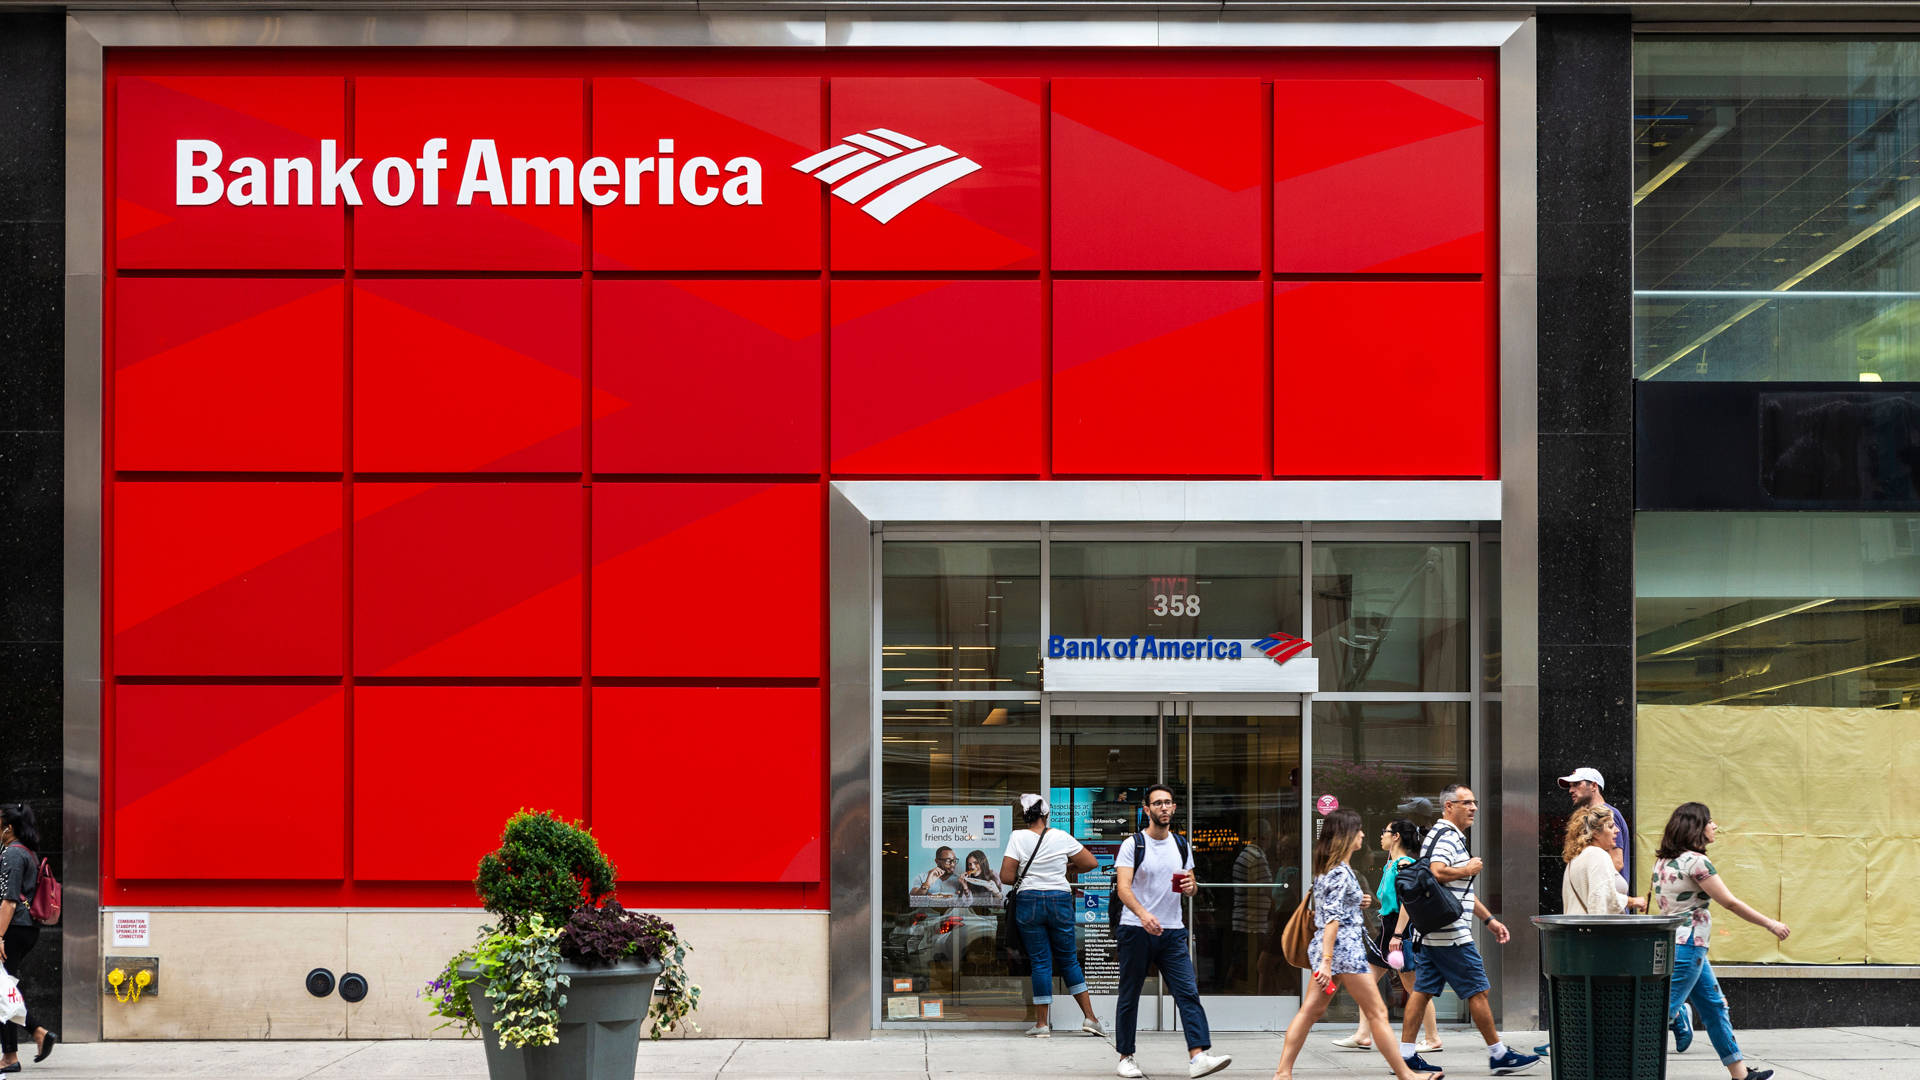 Bank Of America Red Facade Background